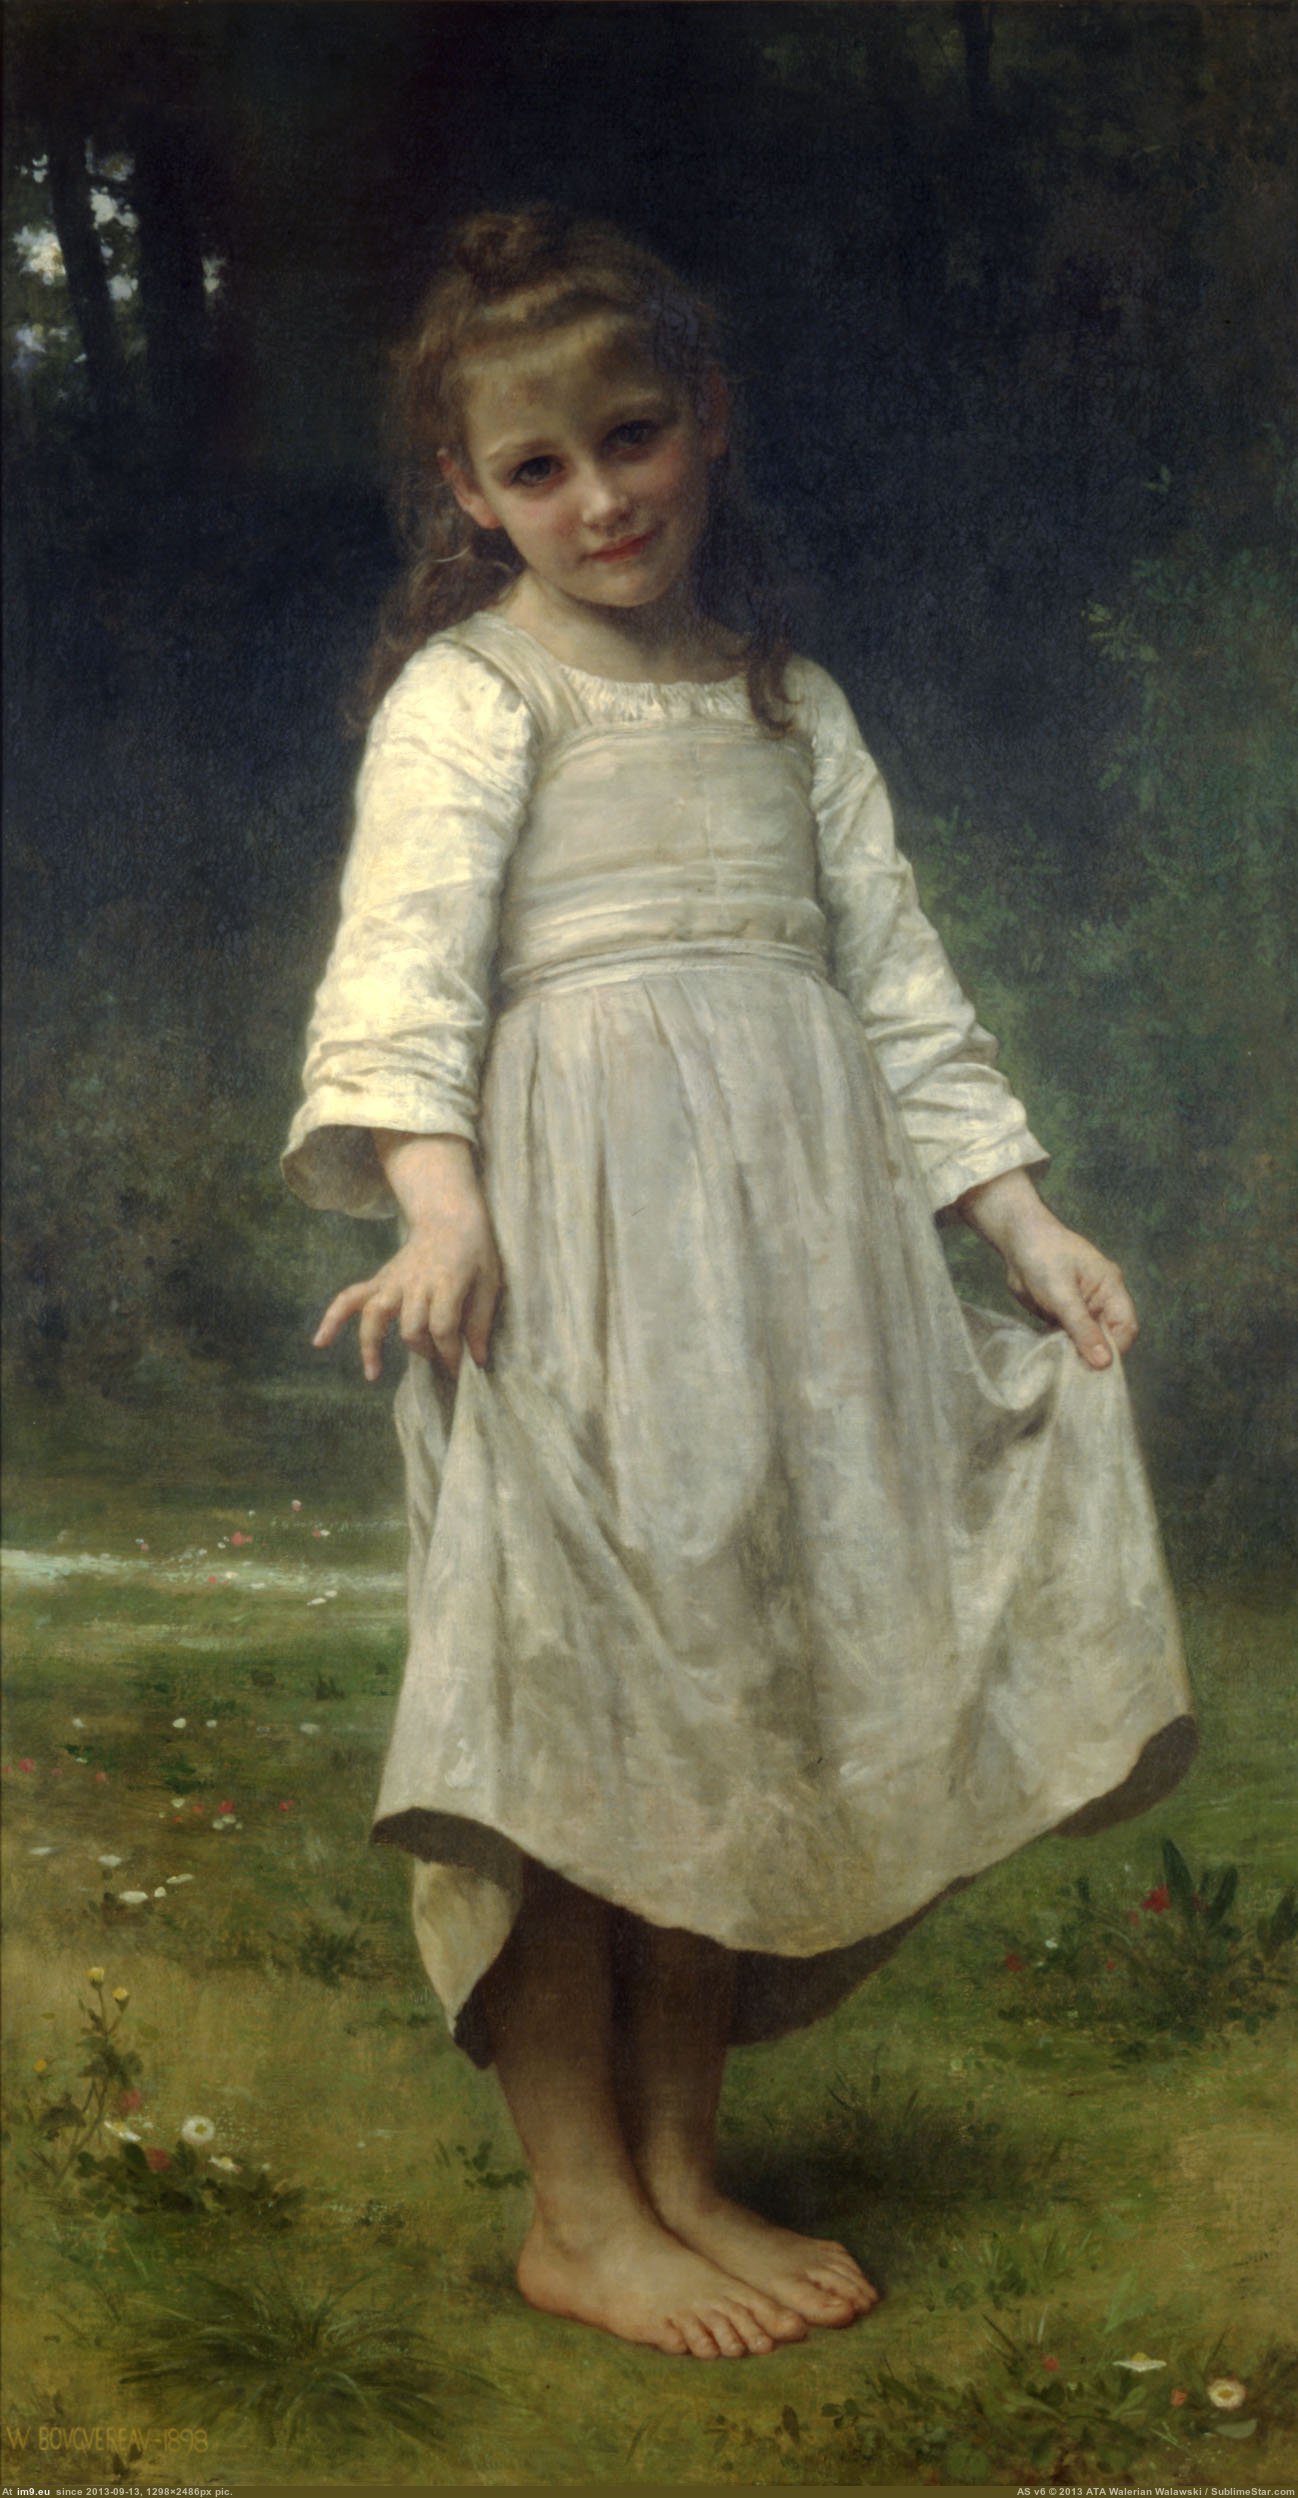 (1898) La Reverence - William Adolphe Bouguereau (in William Adolphe Bouguereau paintings (1825-1905))